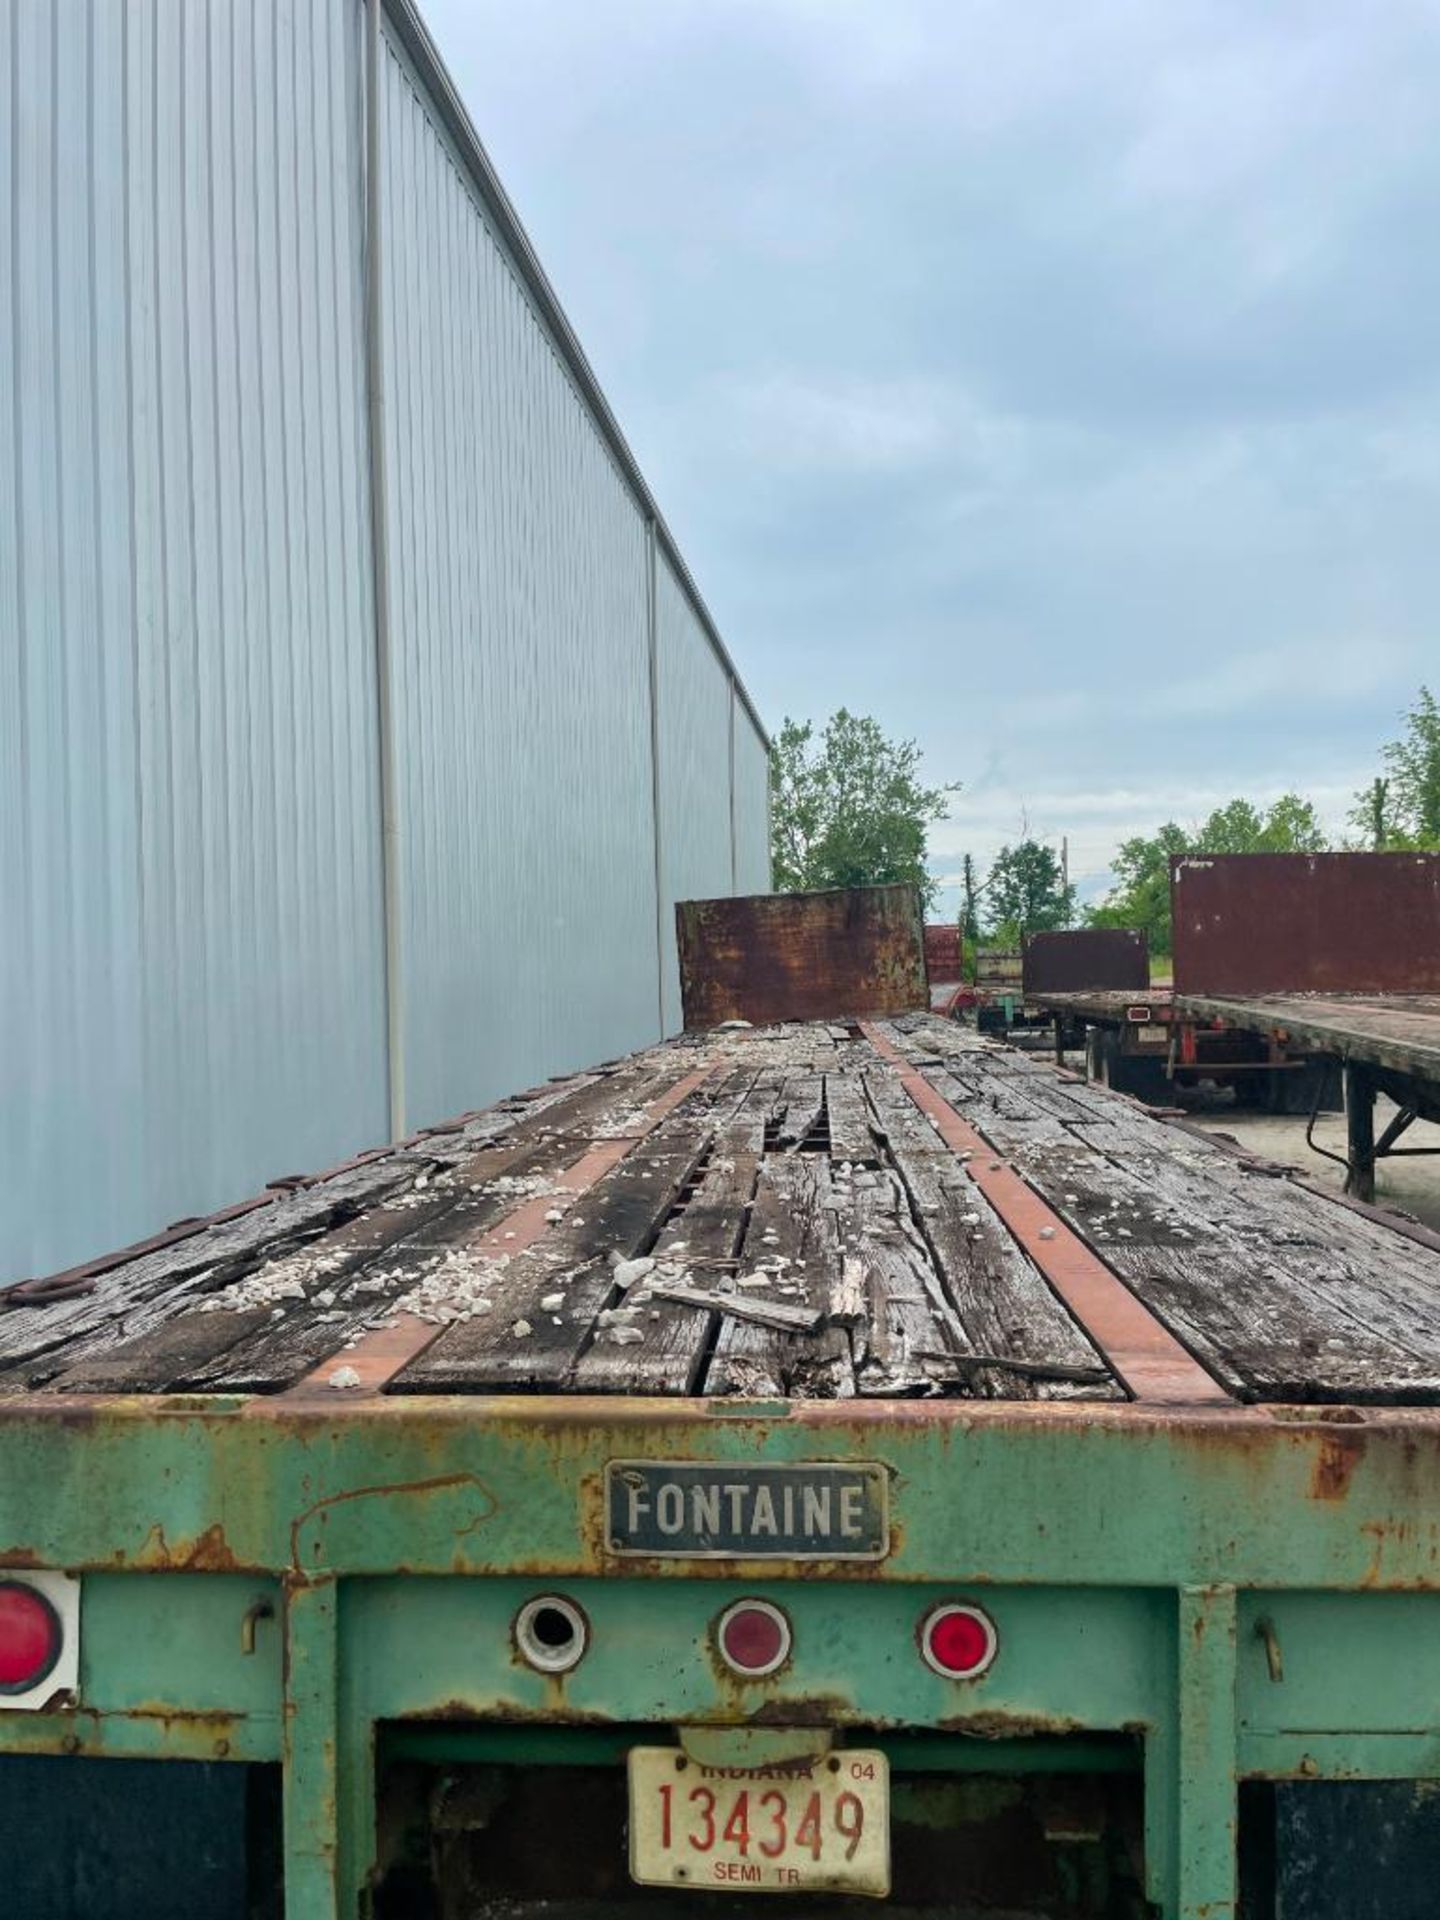 1990 FONTAINE STEEL FLATBED TRAILER, 45' WOOD DECK, DUAL TANDEM AXLE, VIN# 1A11402CCB1535614 - Image 3 of 3